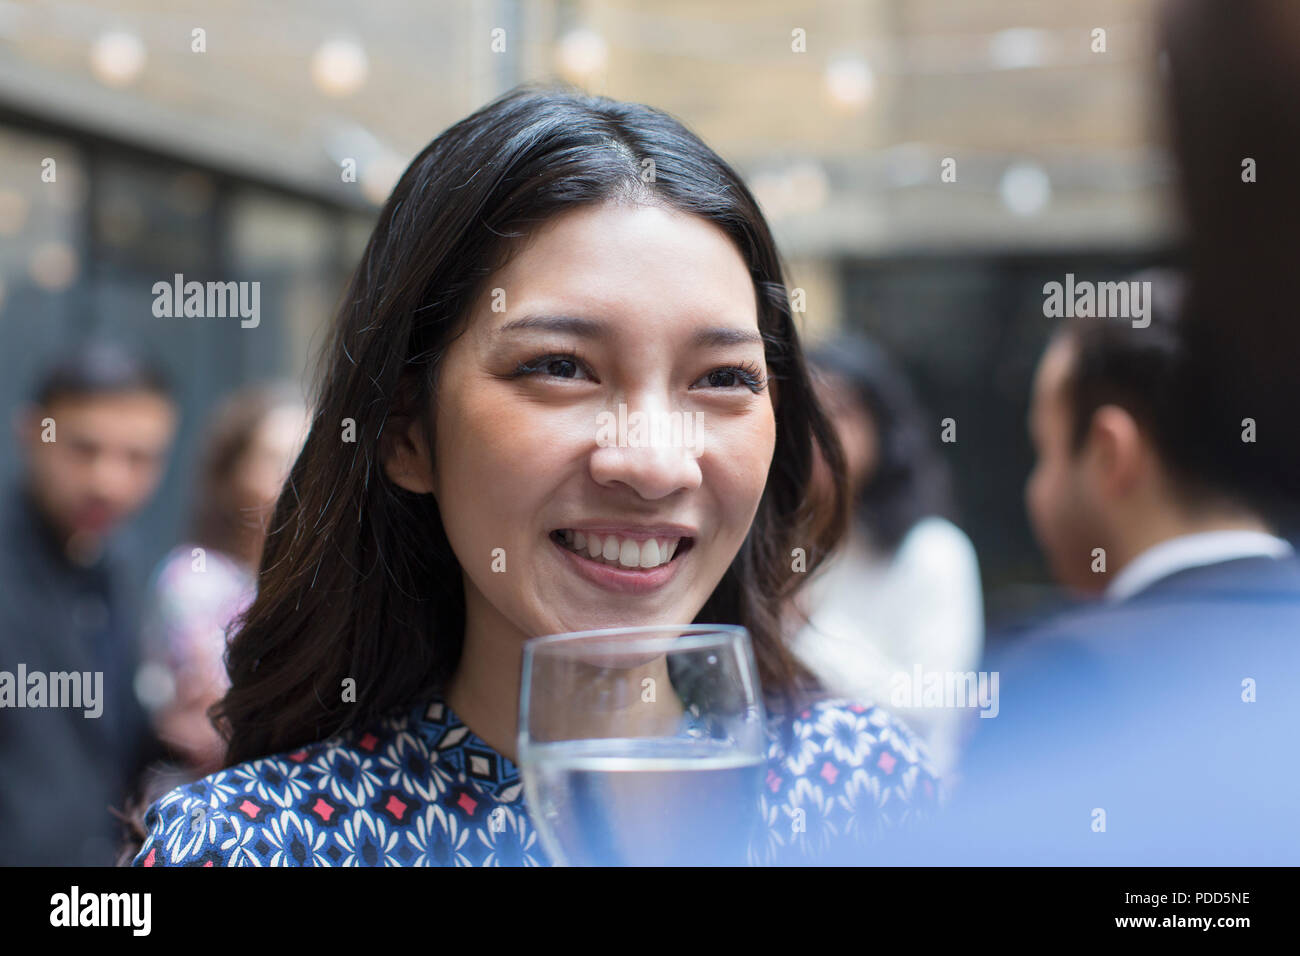 Smiling woman enjoying party Banque D'Images